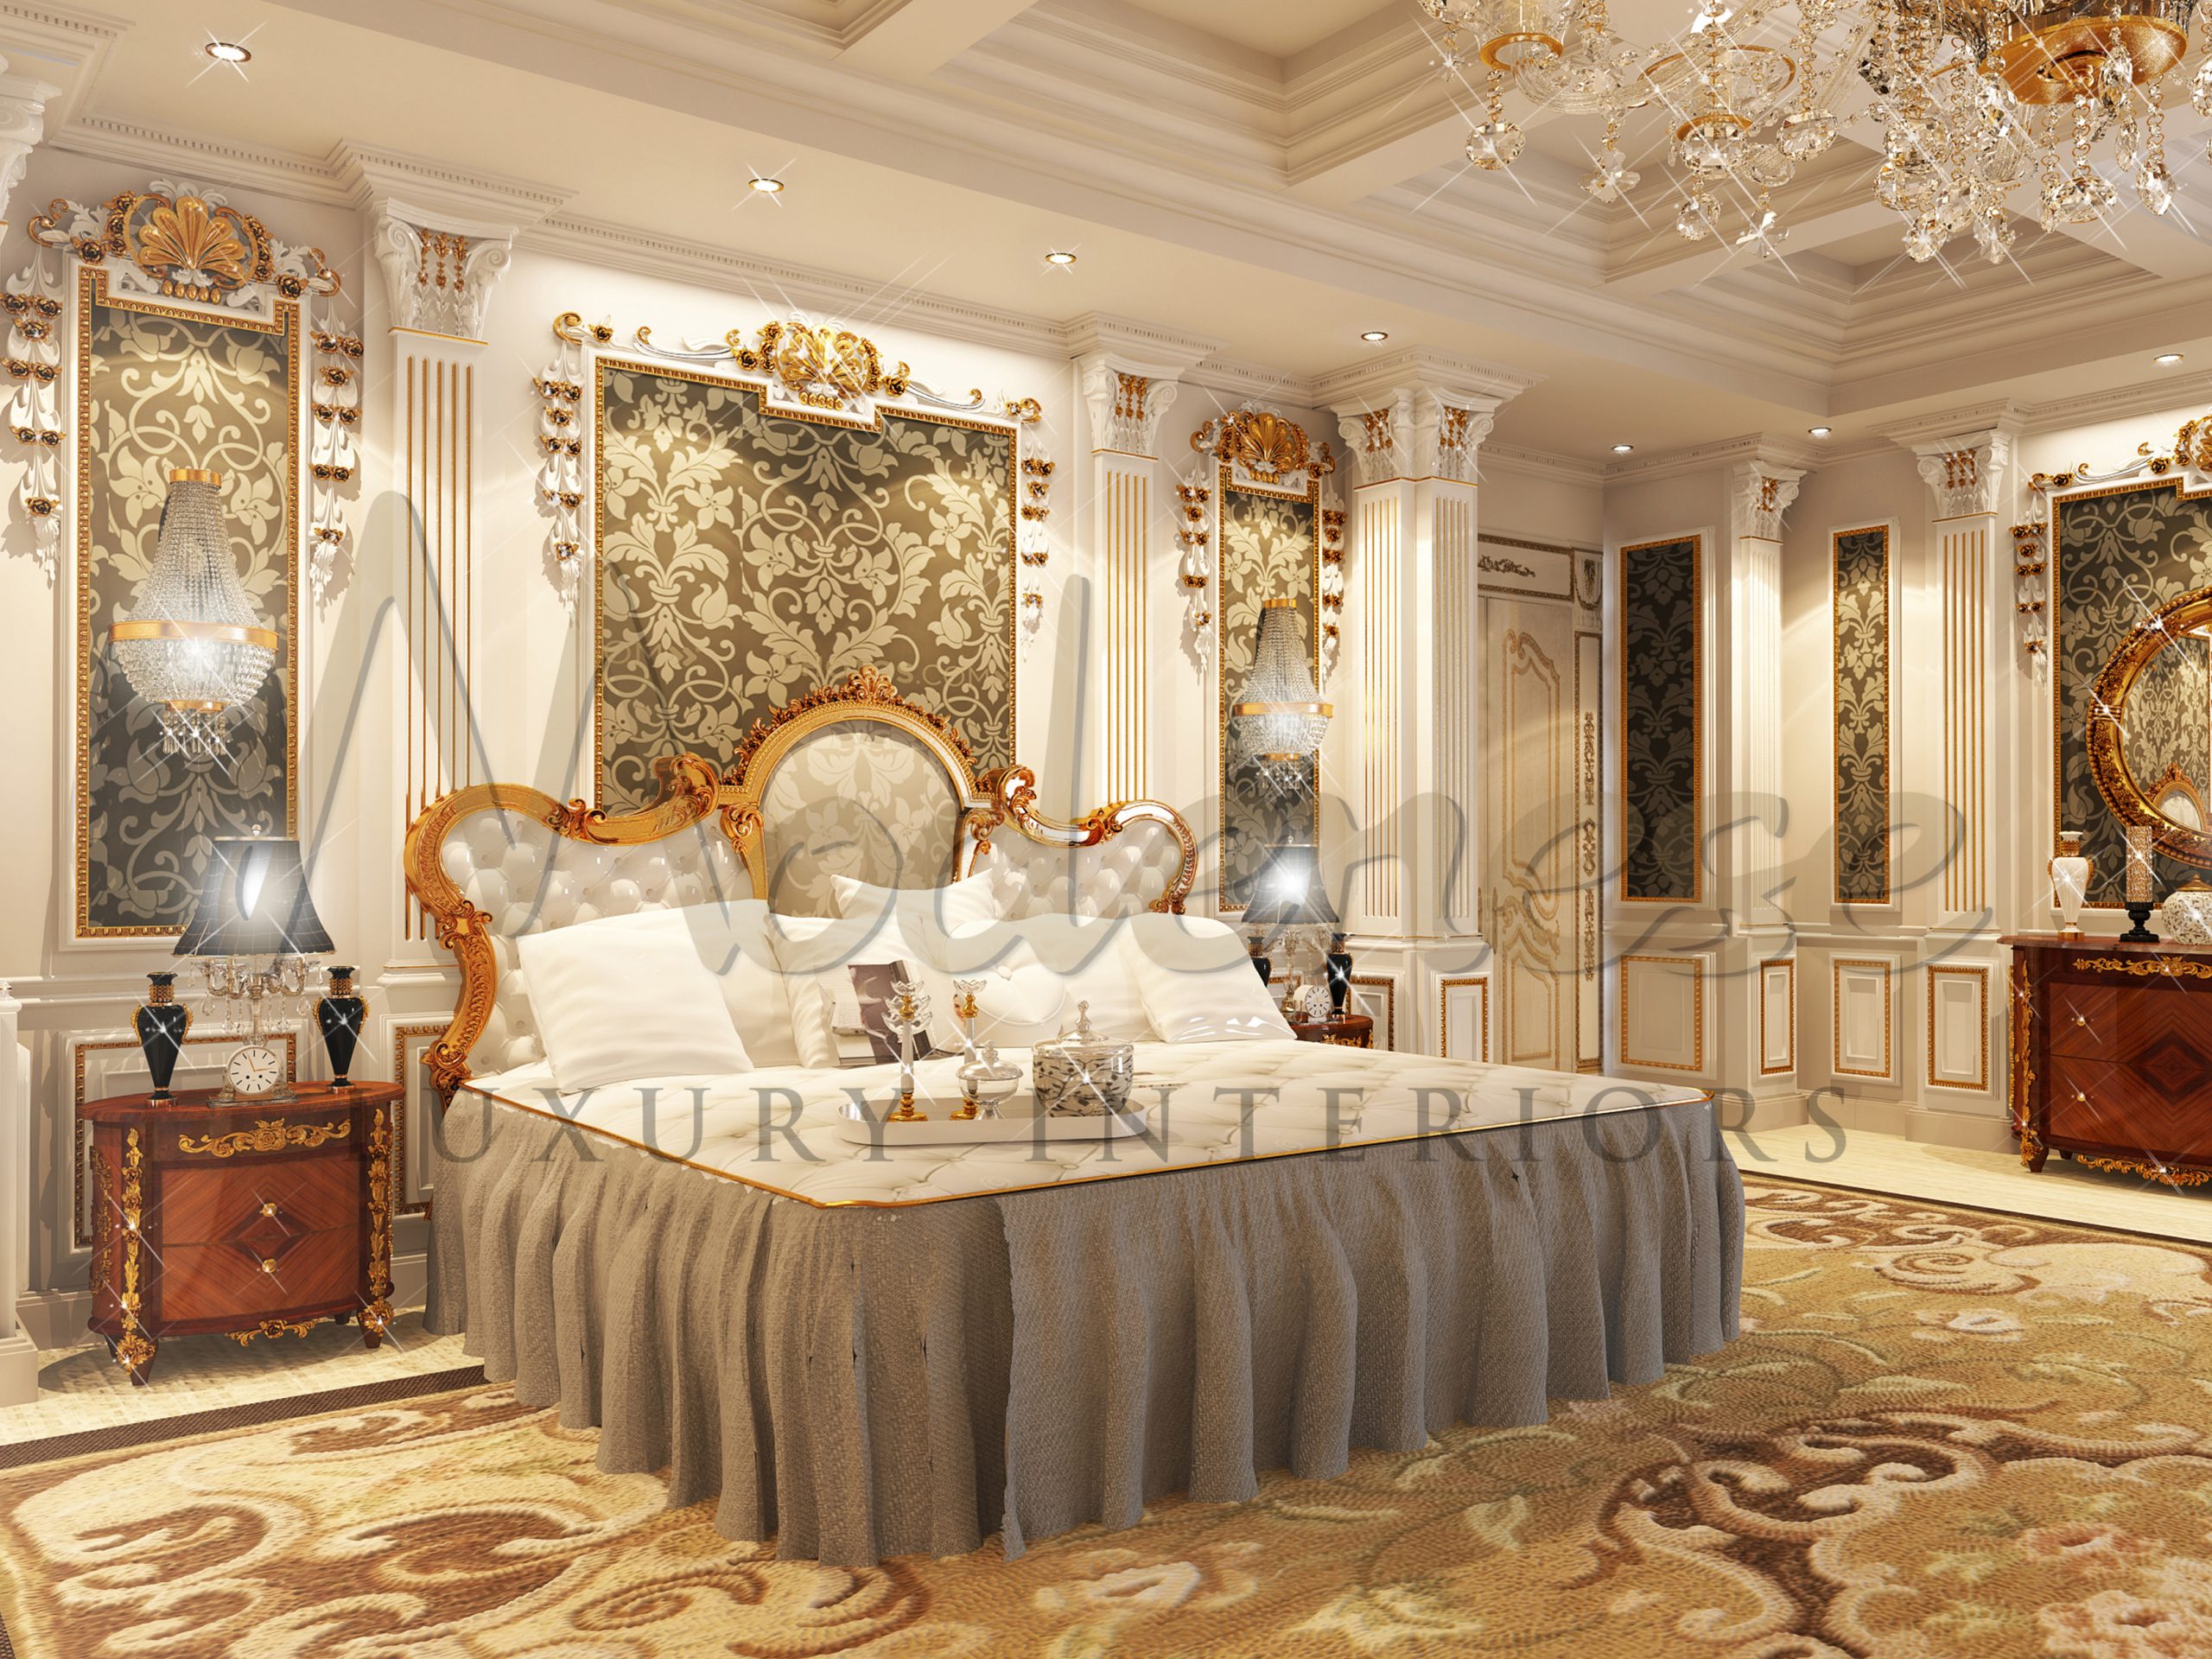 High-end elegant villa design project with Italian bedroom furnishing - unique bedroom furniture ideas made in Italy